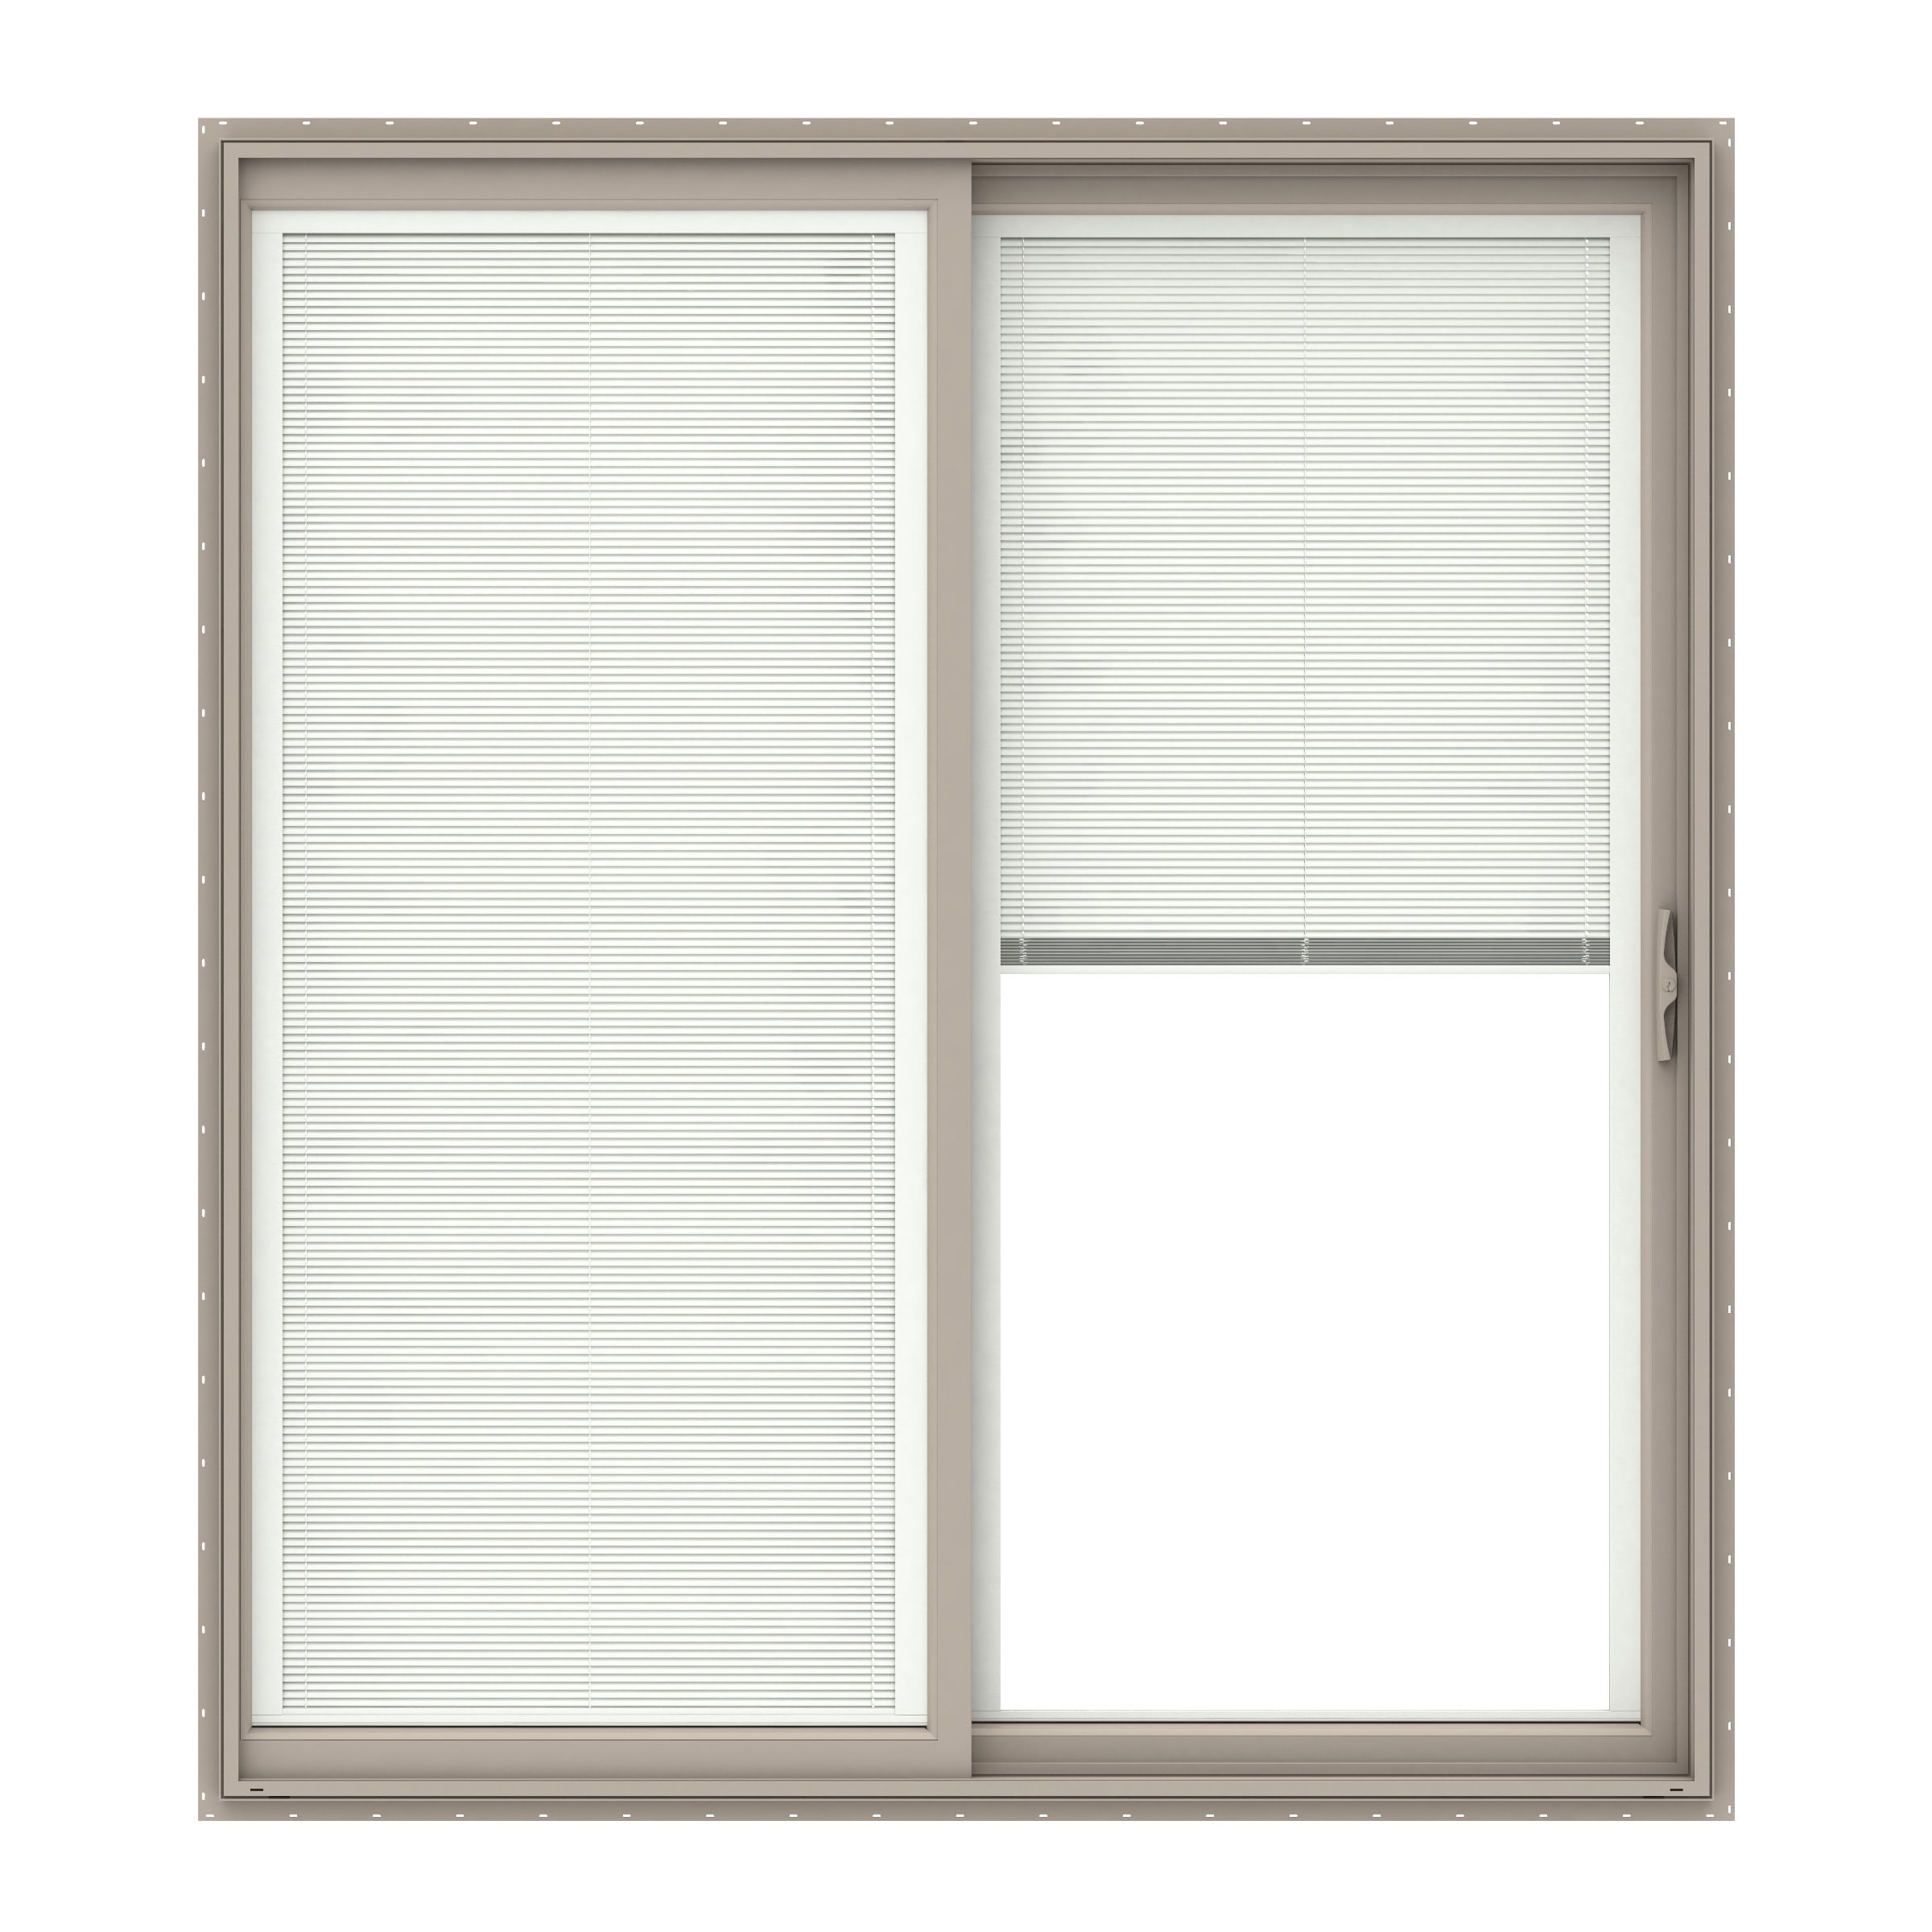 150 Series West 60-in x 80-in Low-e Blinds Between The Glass Fossil Vinyl Sliding Right-Hand Sliding Double Patio Door in Brown/Tan | - Pella 1000011496